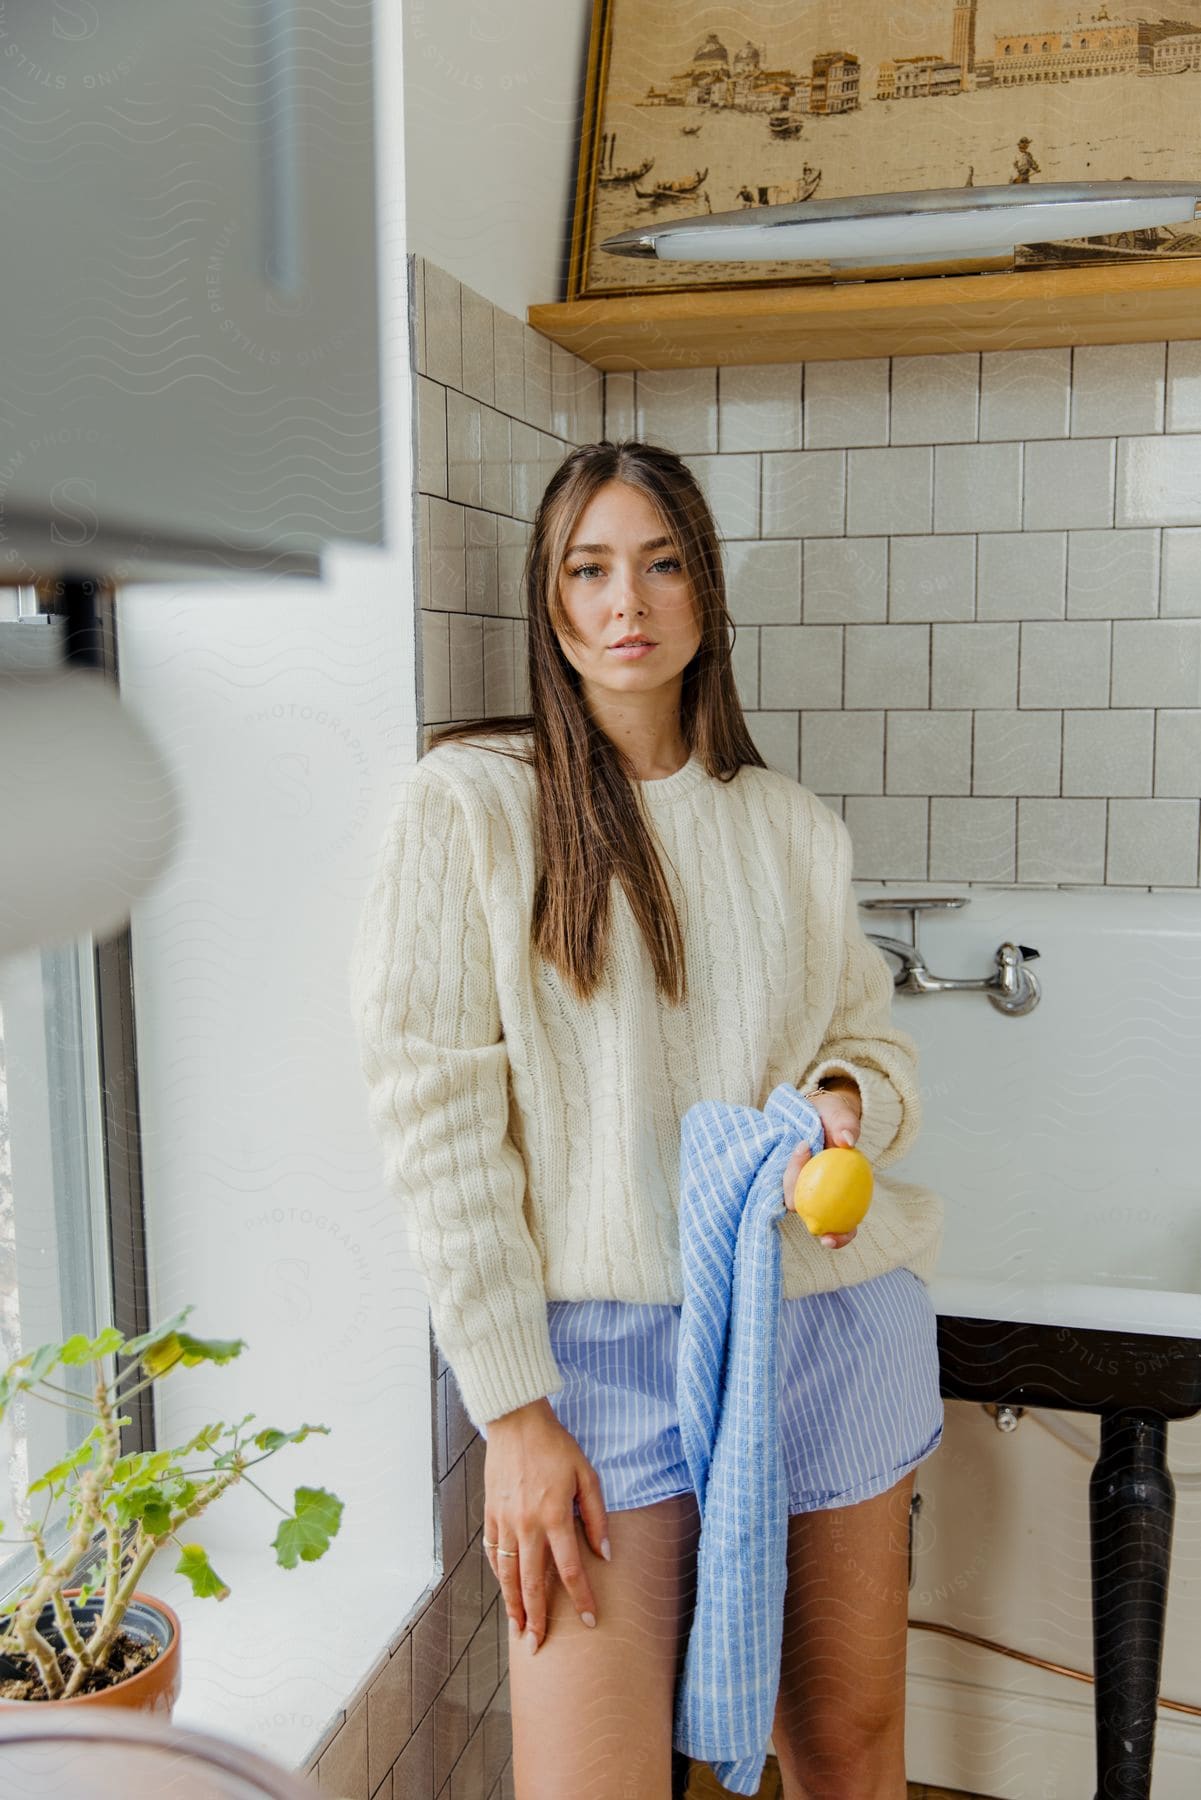 Woman posing indoors wearing a wool sweater, blue shorts, and holding a Sicilian lemon.